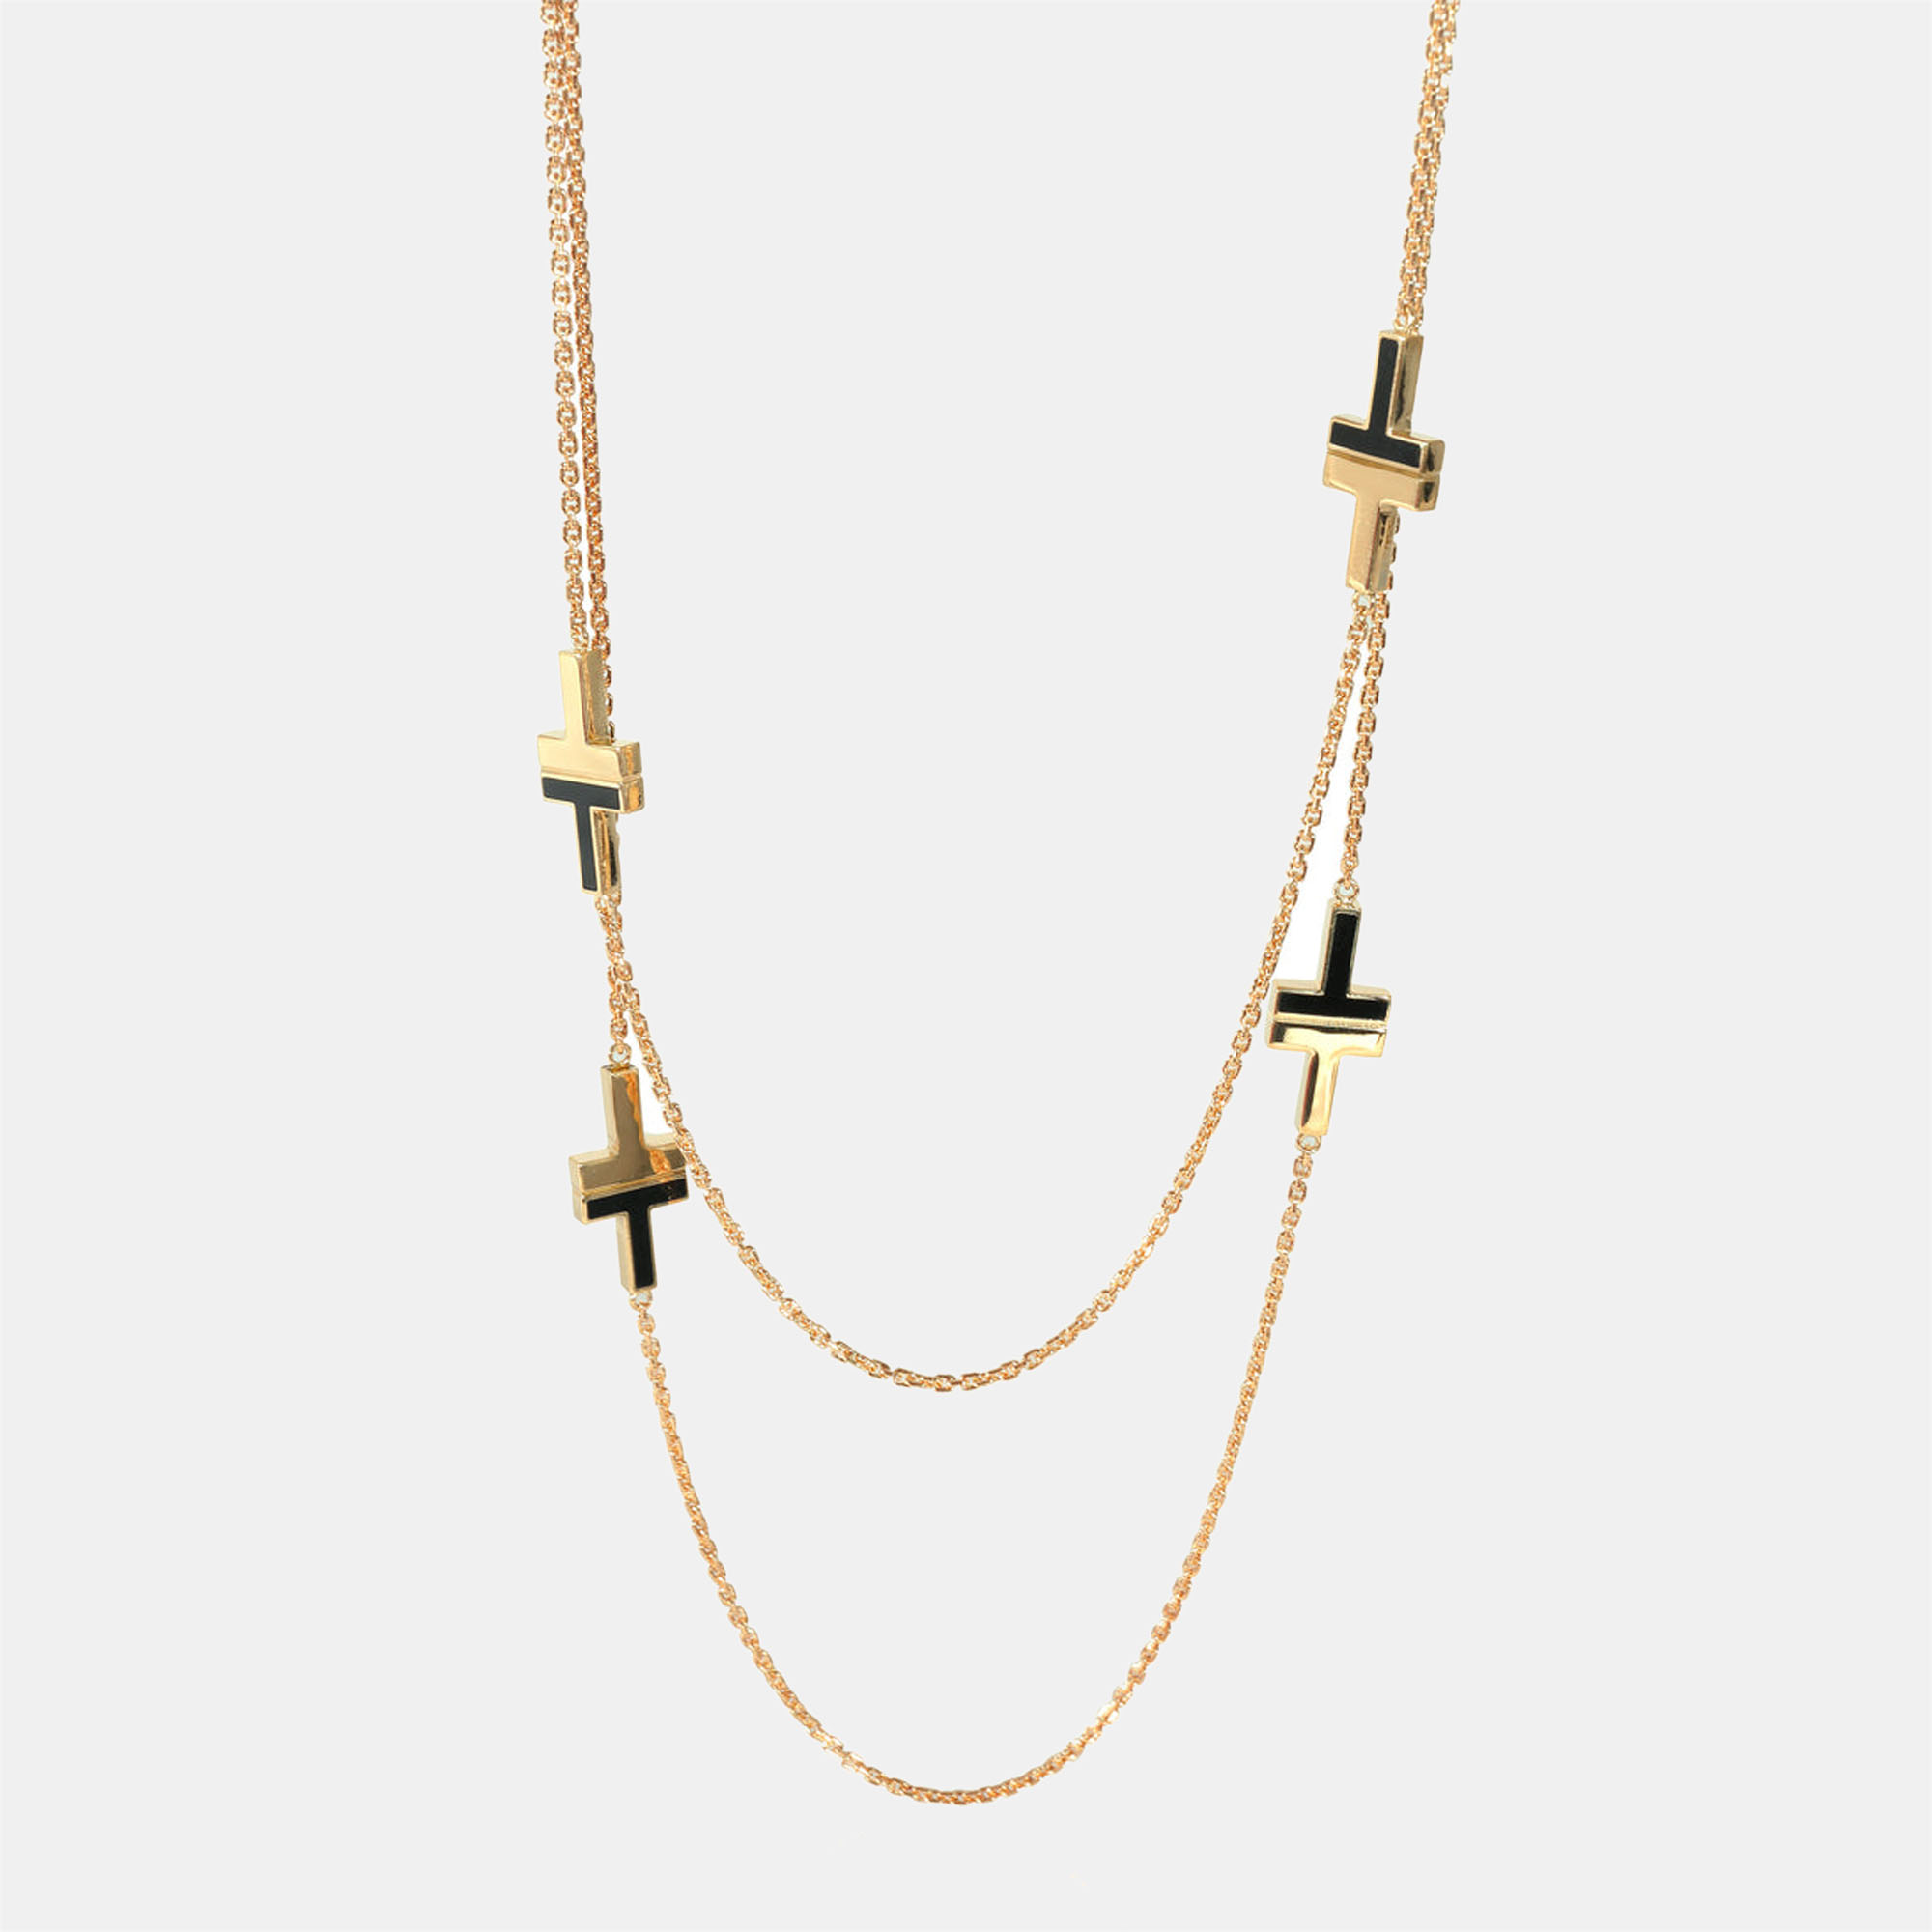 Tiffany & co. tiffany t black onyx station necklace in 18k yellow gold